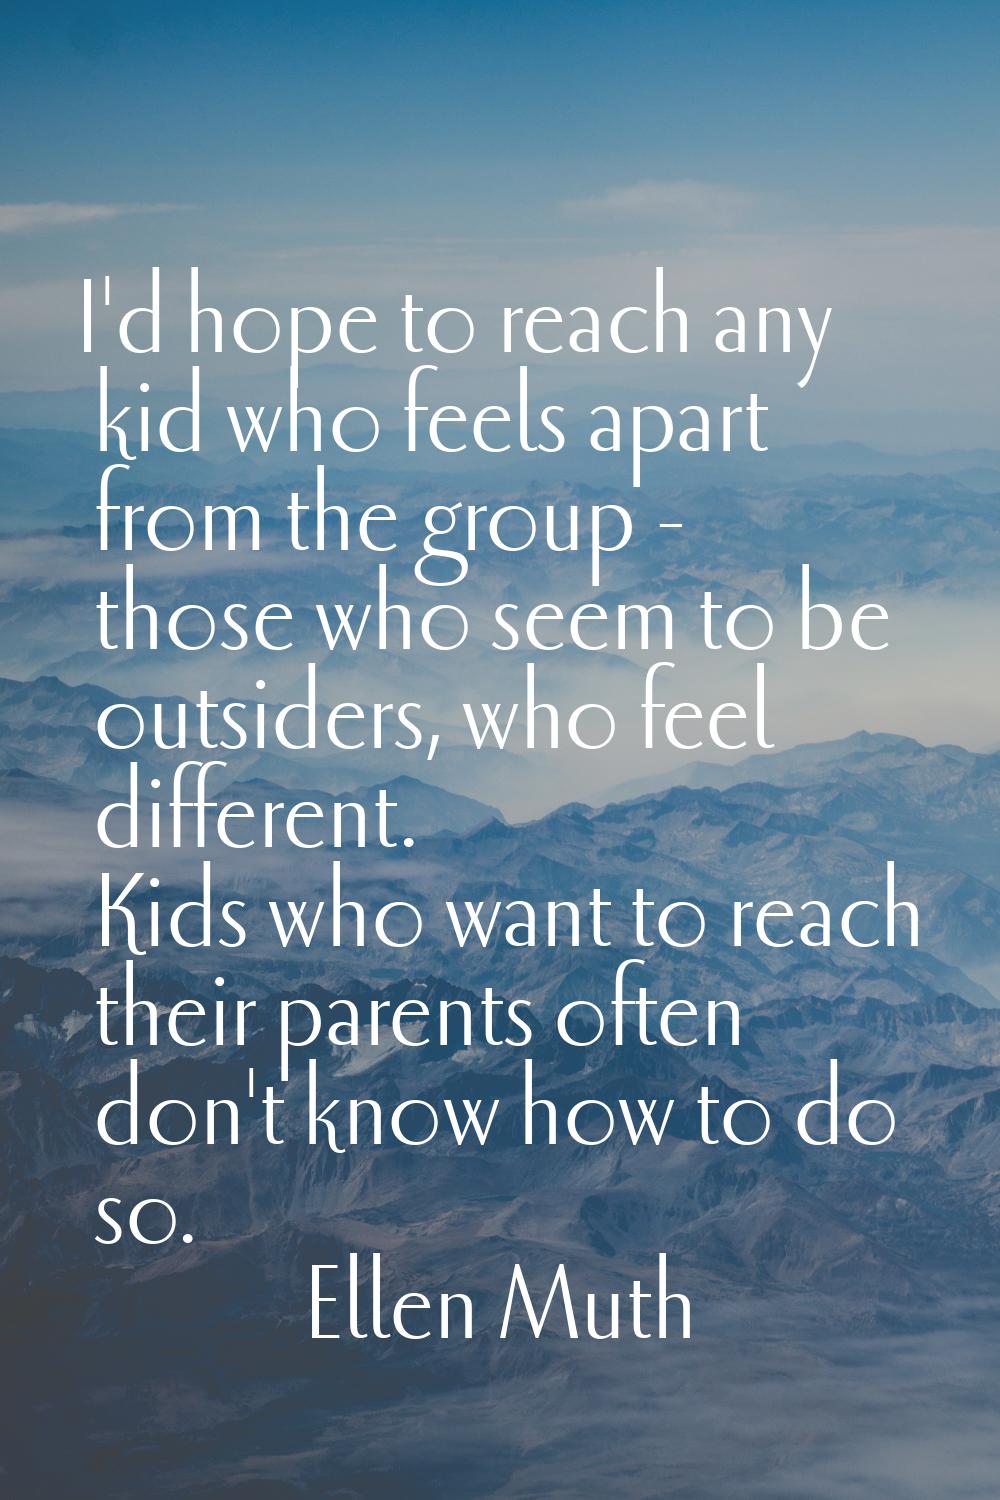 I'd hope to reach any kid who feels apart from the group - those who seem to be outsiders, who feel